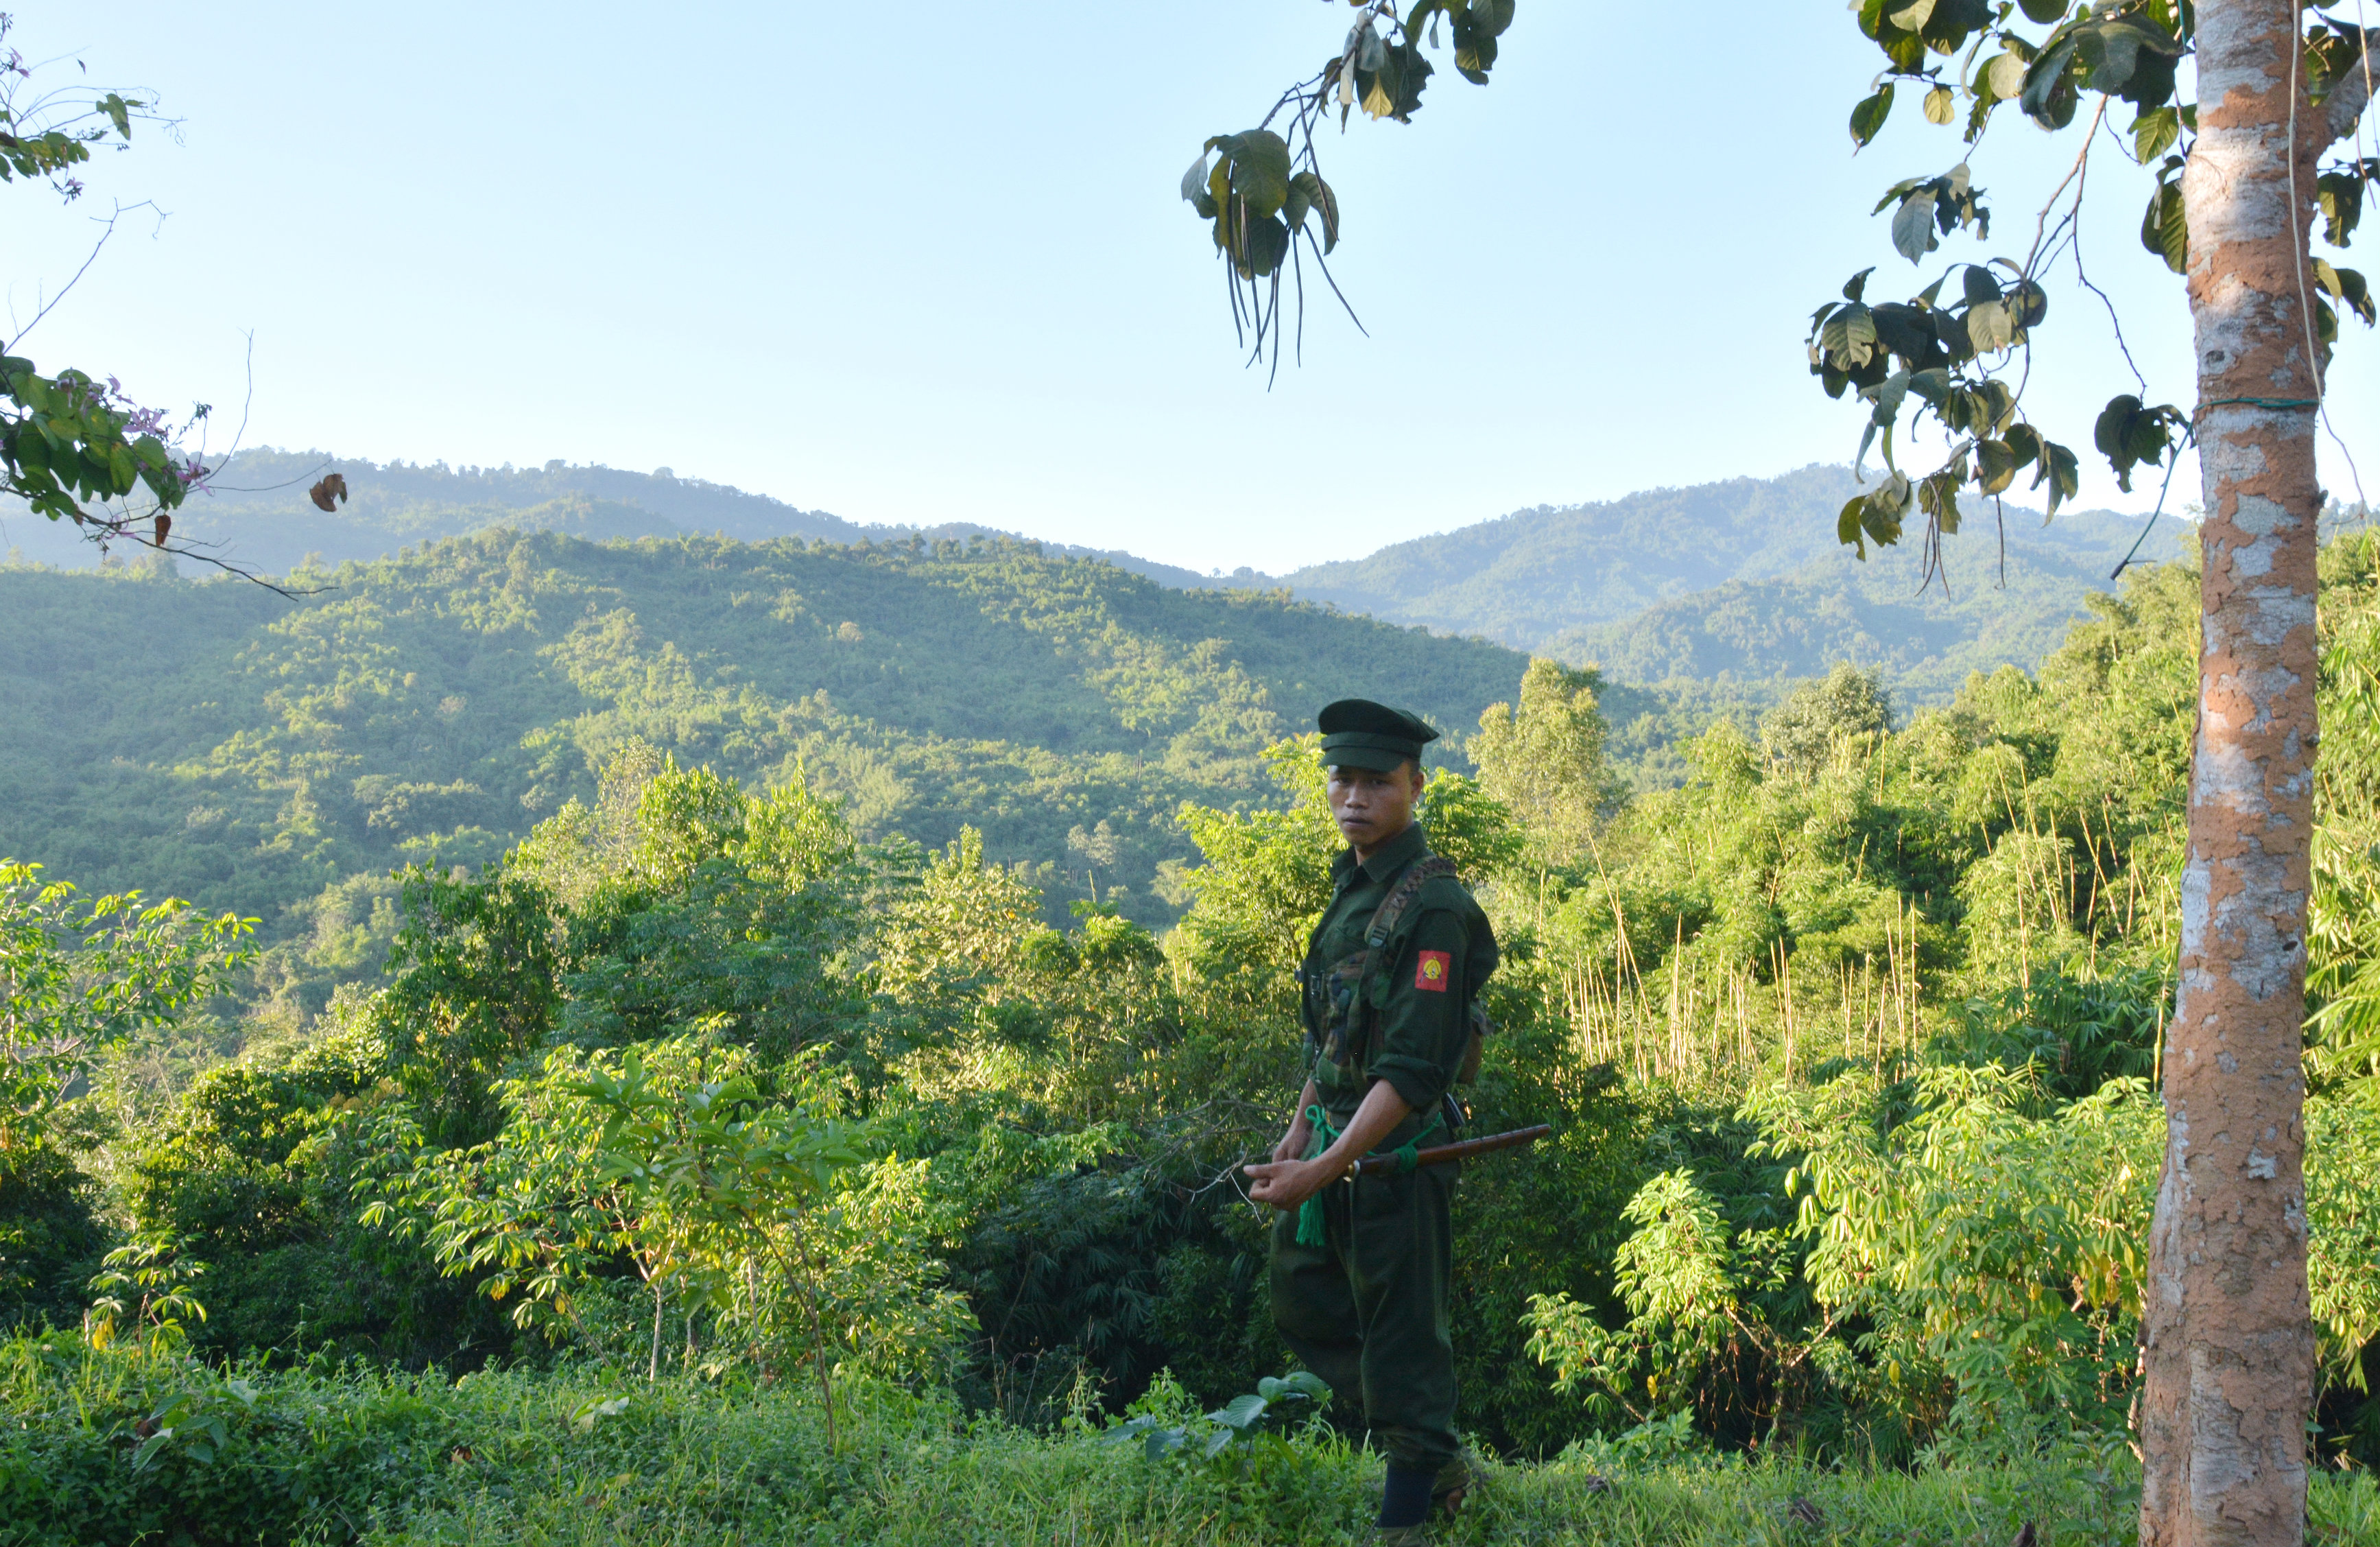 A Kachin Independence Army (KIA) soldier seen at Lawa Yang front-line post. The Burma army is stationed on the hills in the background. (Paul Vrieze)